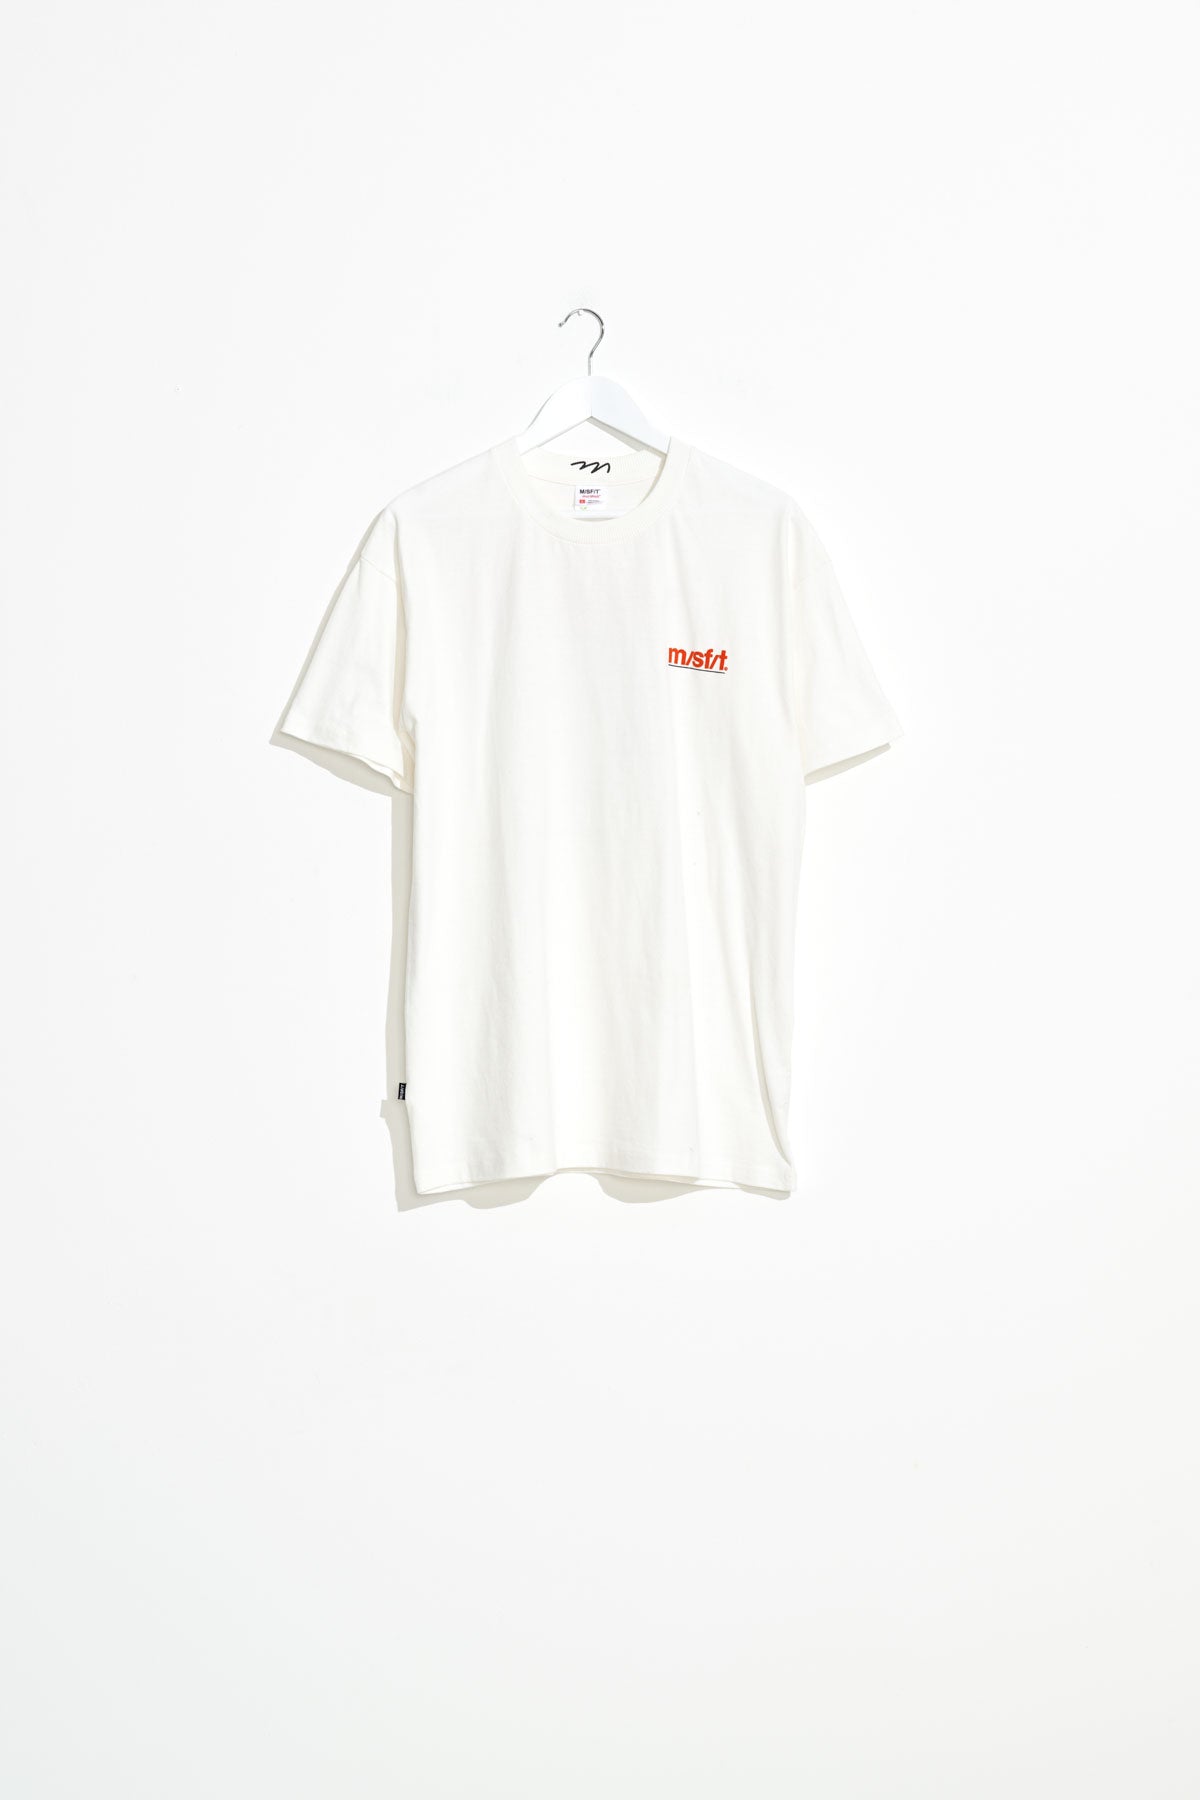 Misfit Shapes - United Needs 50-50 Aaa SS Tee - Washed White